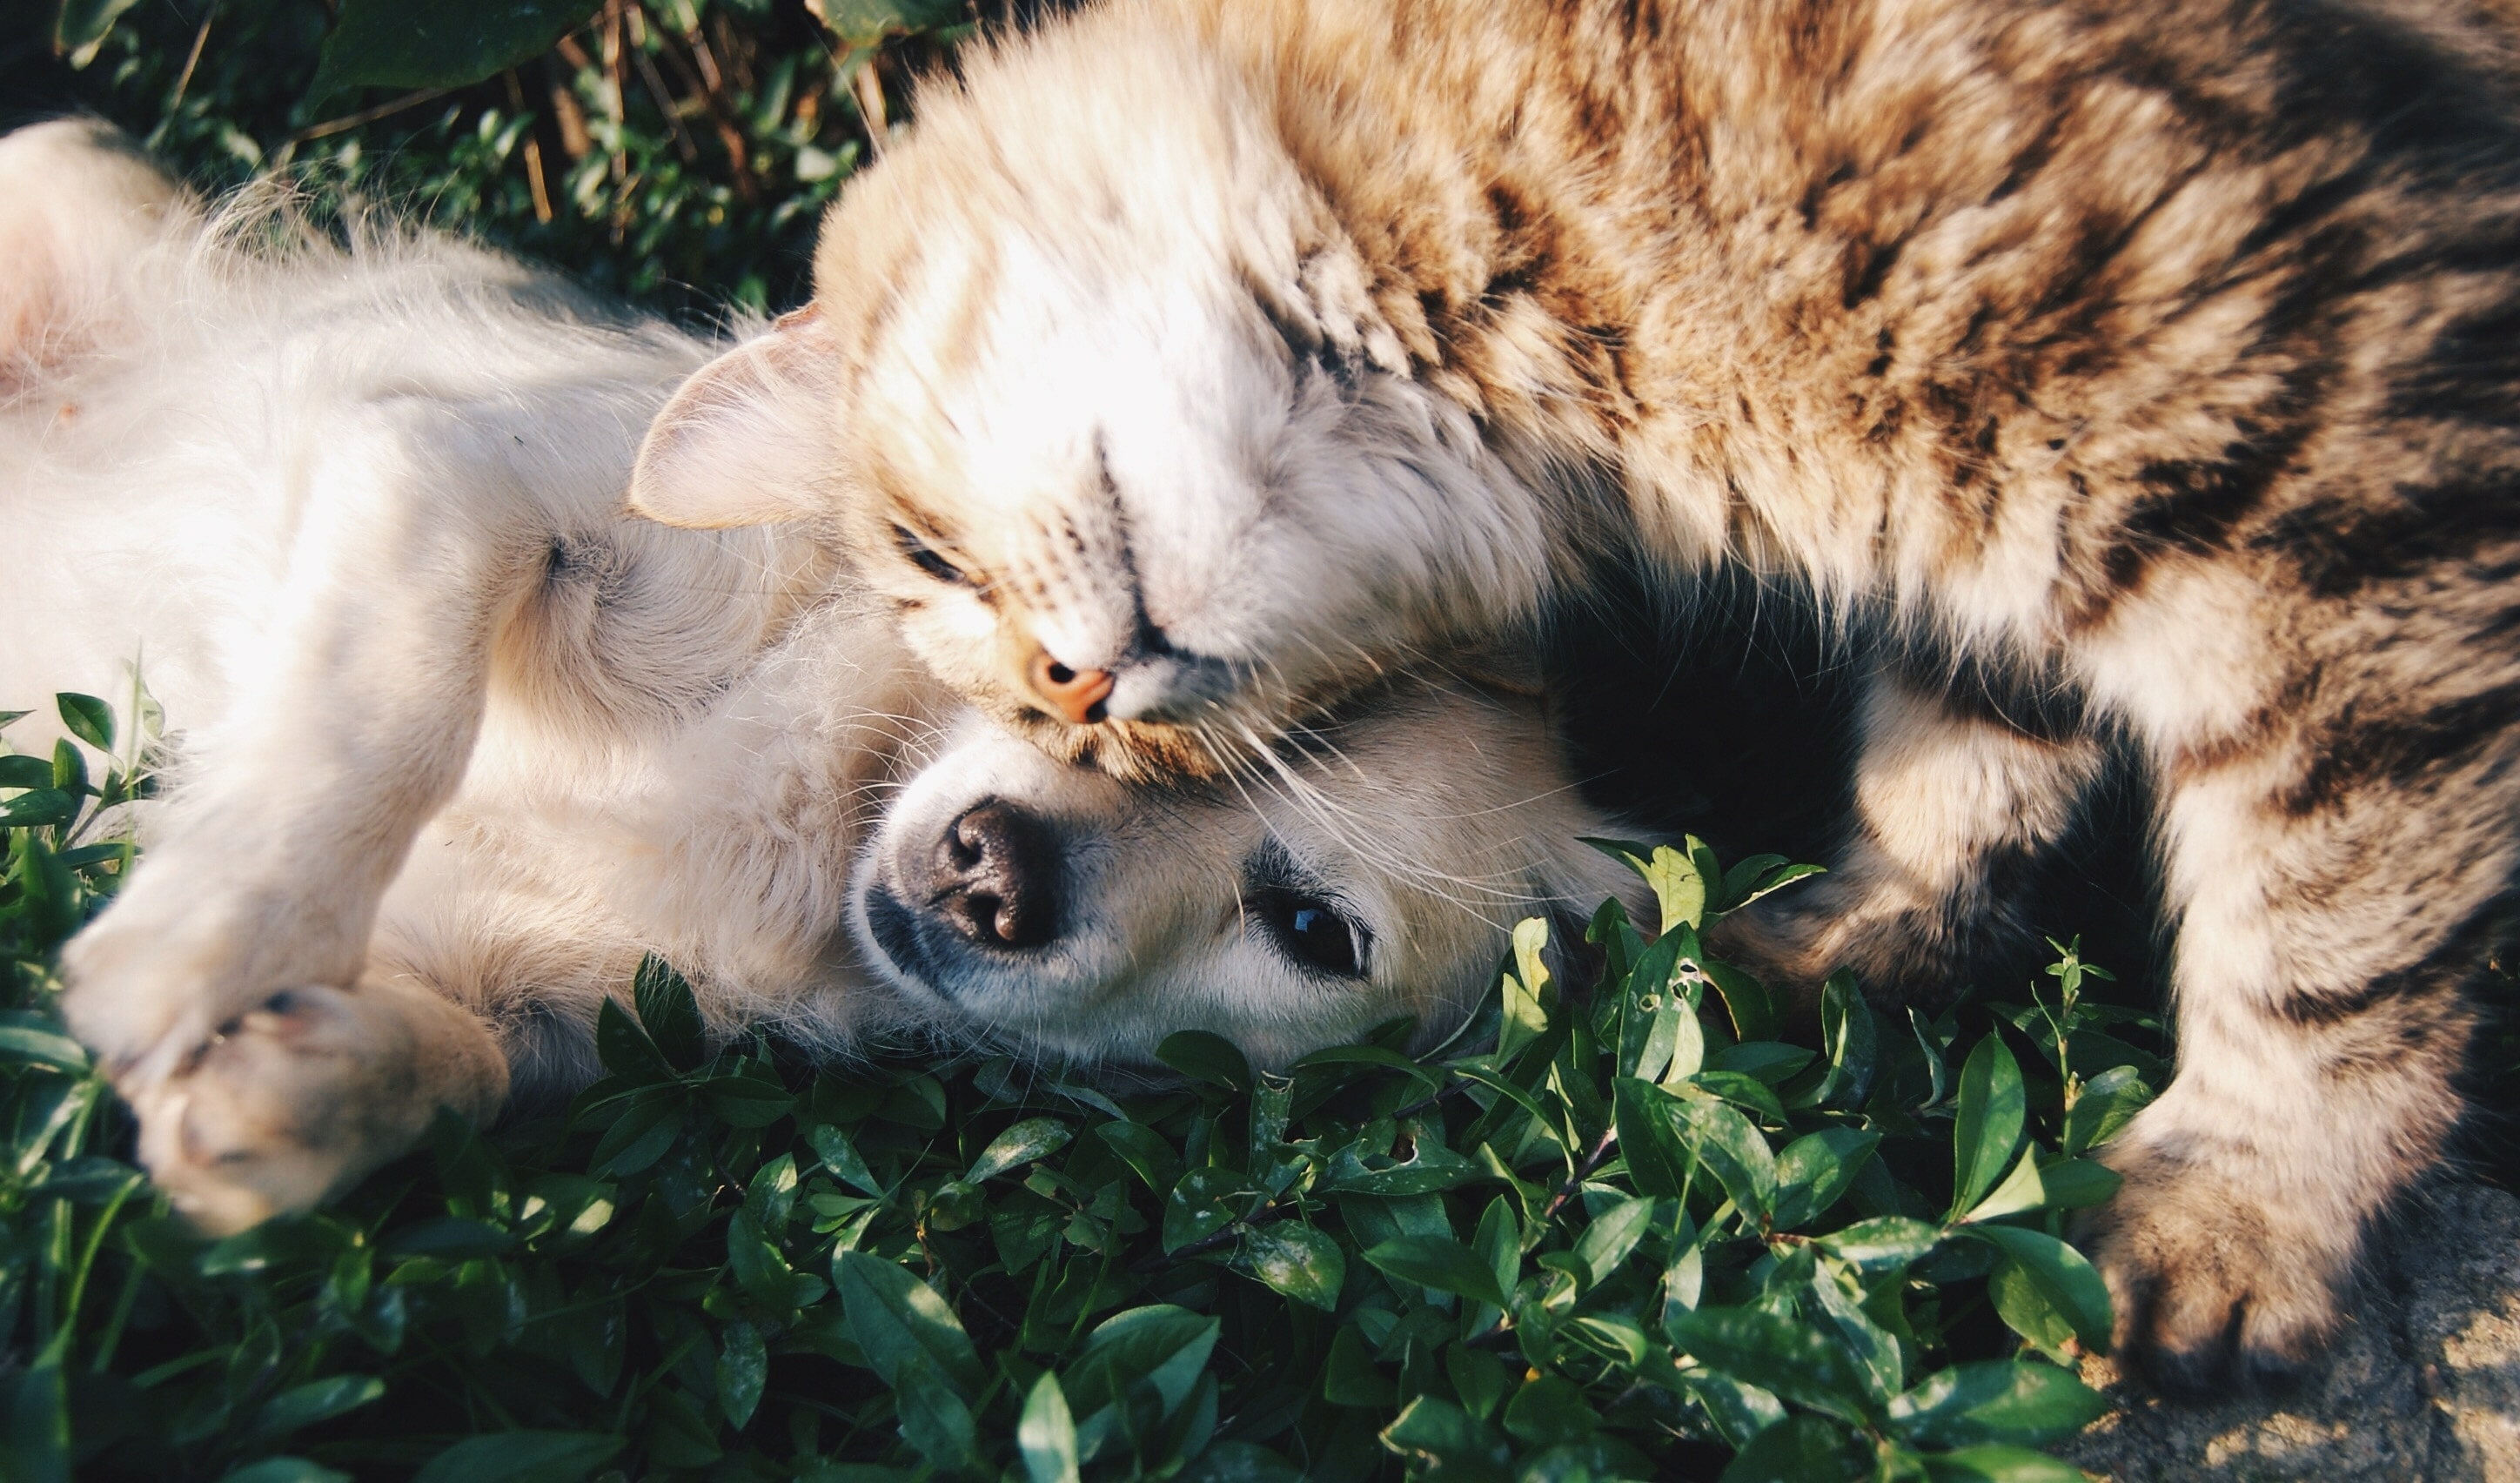 A dog and a cat snuggle in the grass.